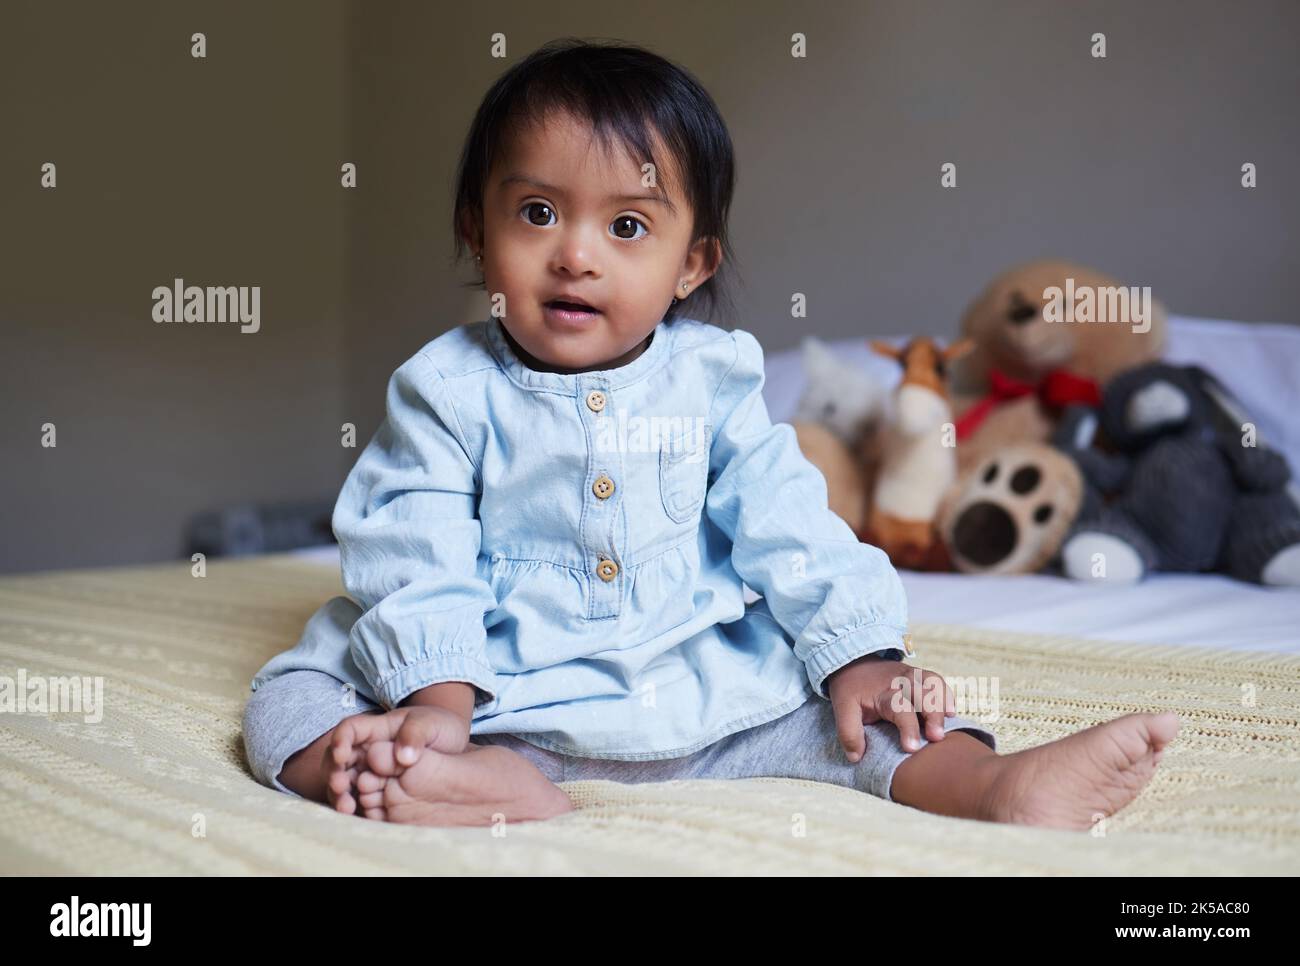 Baby, cute and innocent with a girl on a bed in her home alone with a teddy bear and stuffed toys in the background. Children, small and pure with a Stock Photo